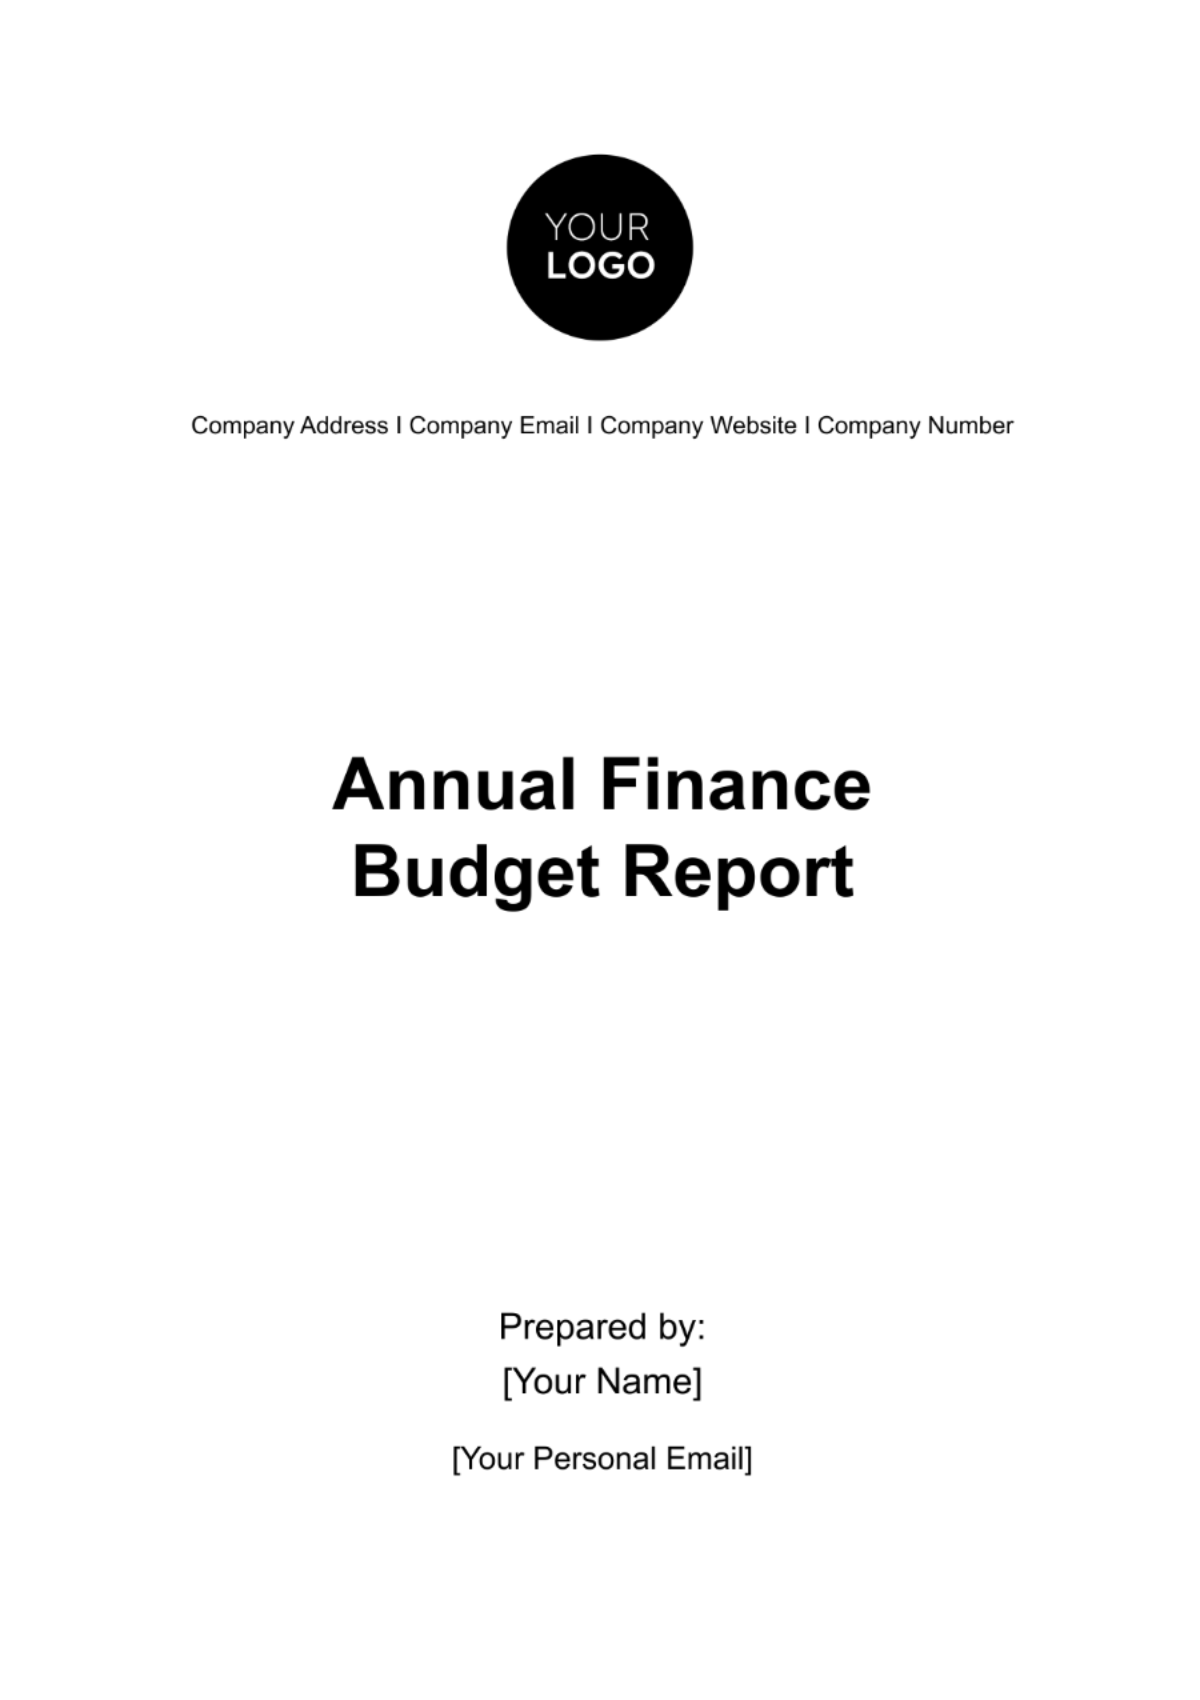 Annual Finance Budget Report Template